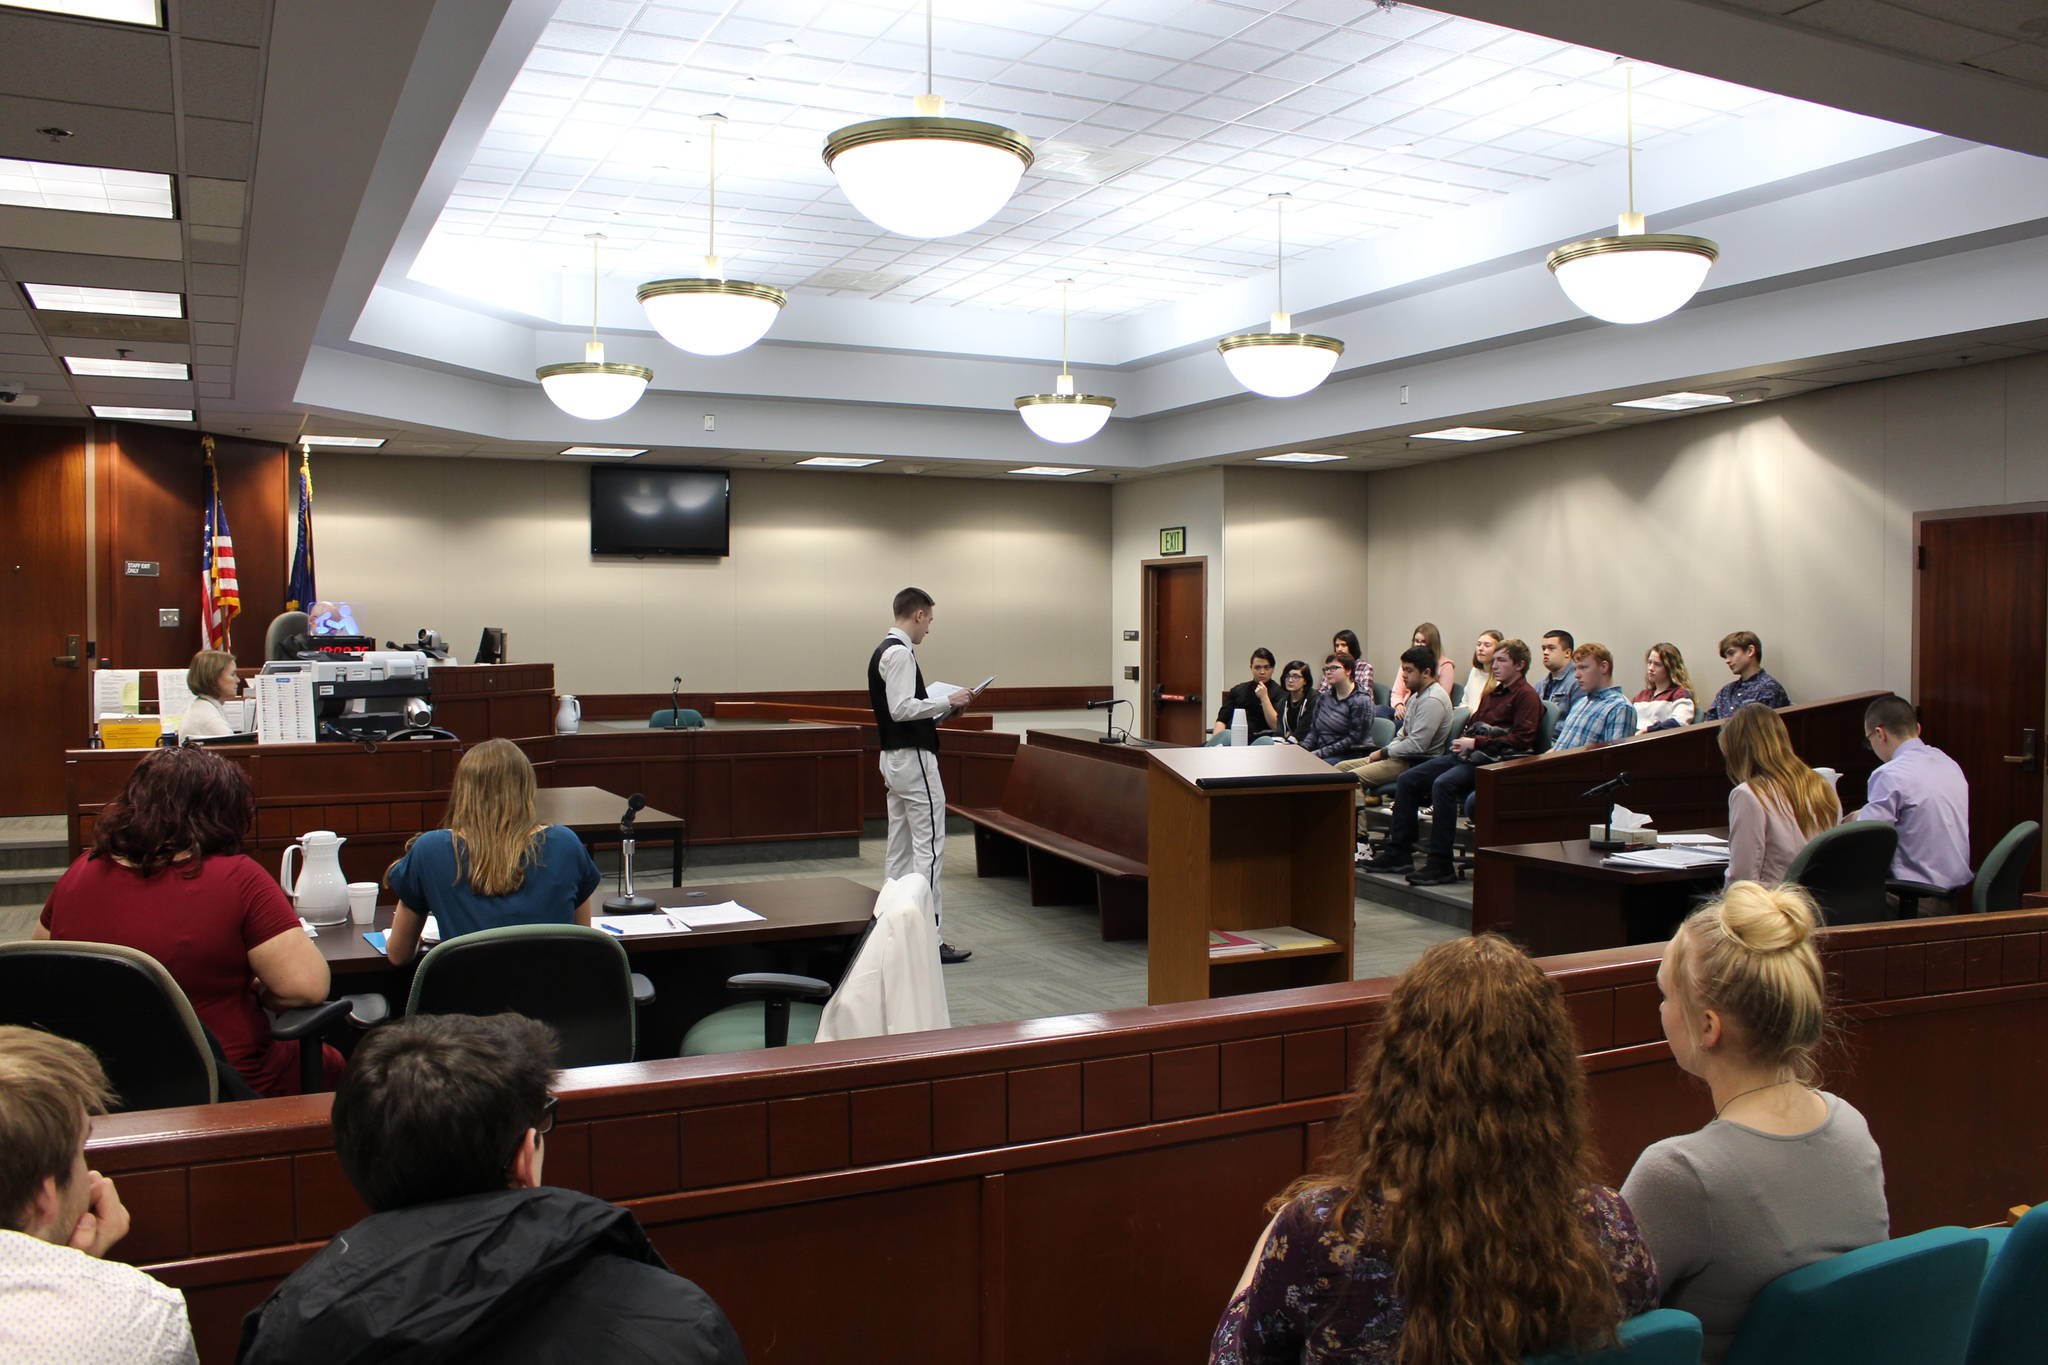 Students from Nikiski/Middle High School participate in a mock trial at the Kenai Courthouse on Dec. 3, 2019. (Photo by Brian Mazurek/Peninsula Clarion)